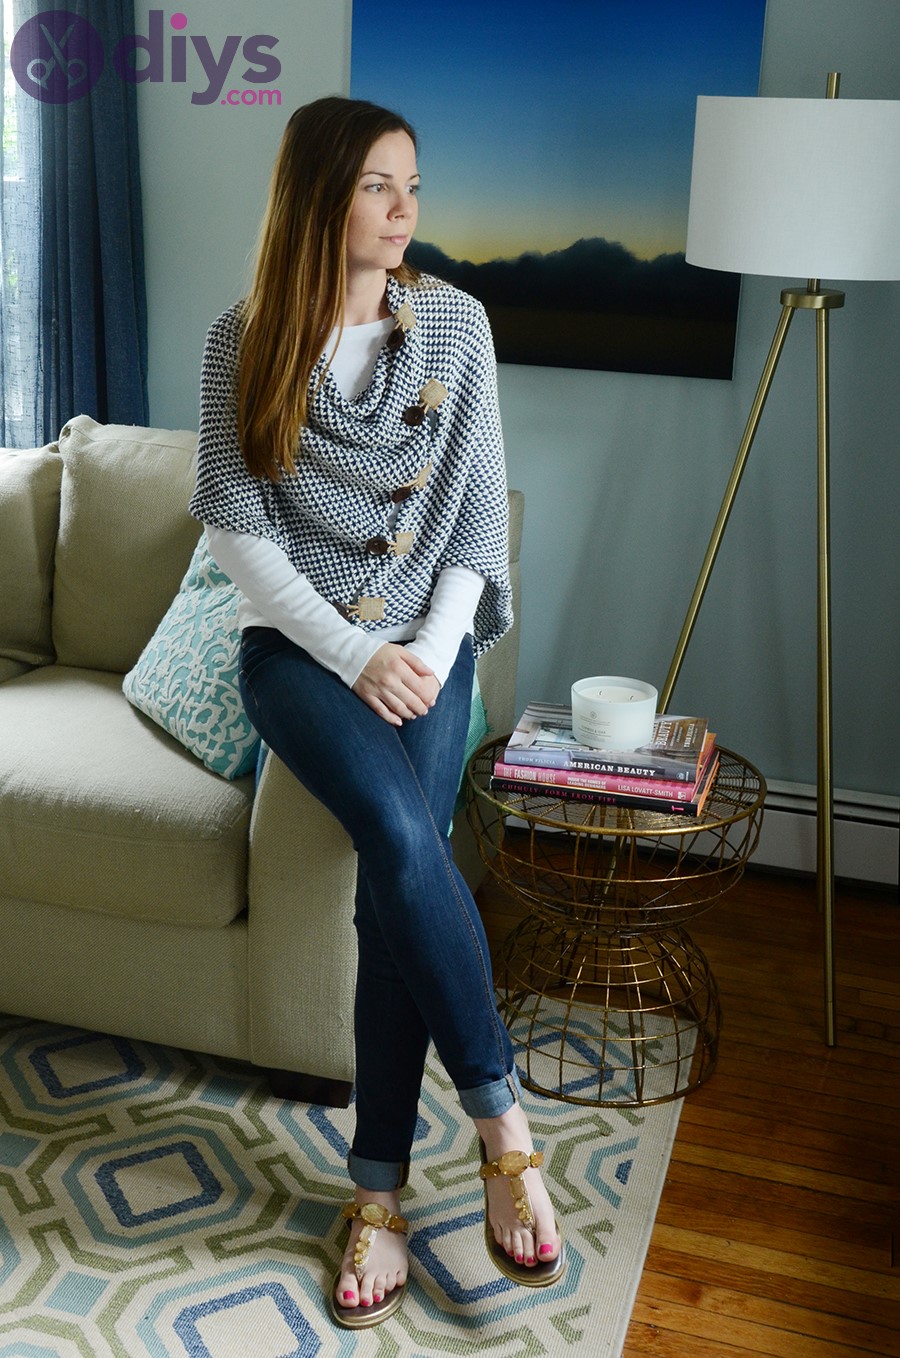 Diy knit sweater best christmas gifts for mom 